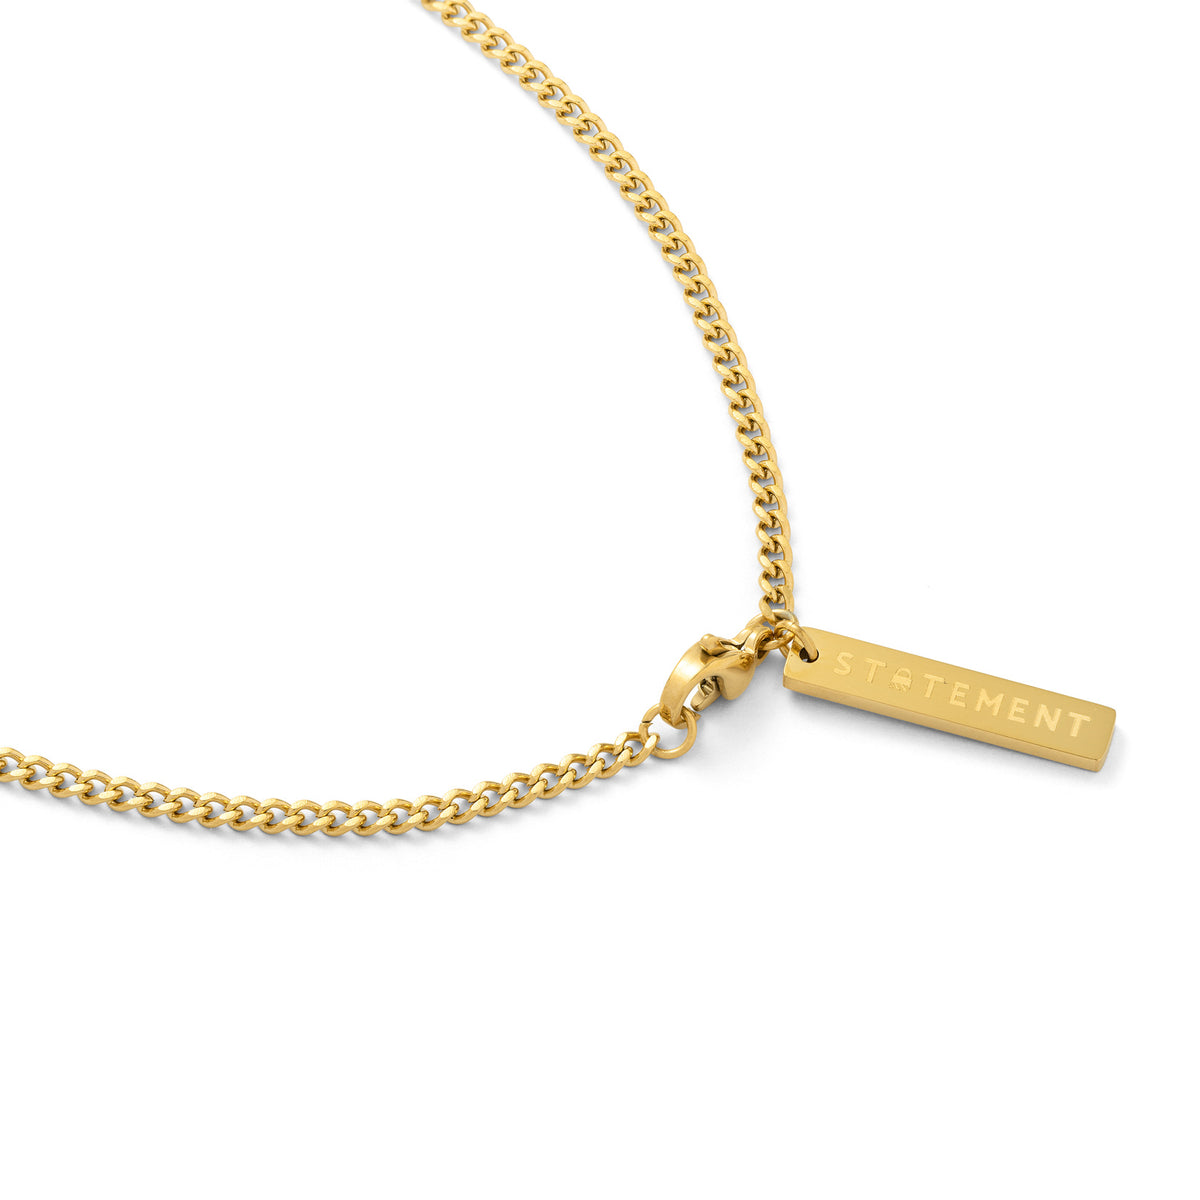 Dainty gold cuban chain with tag